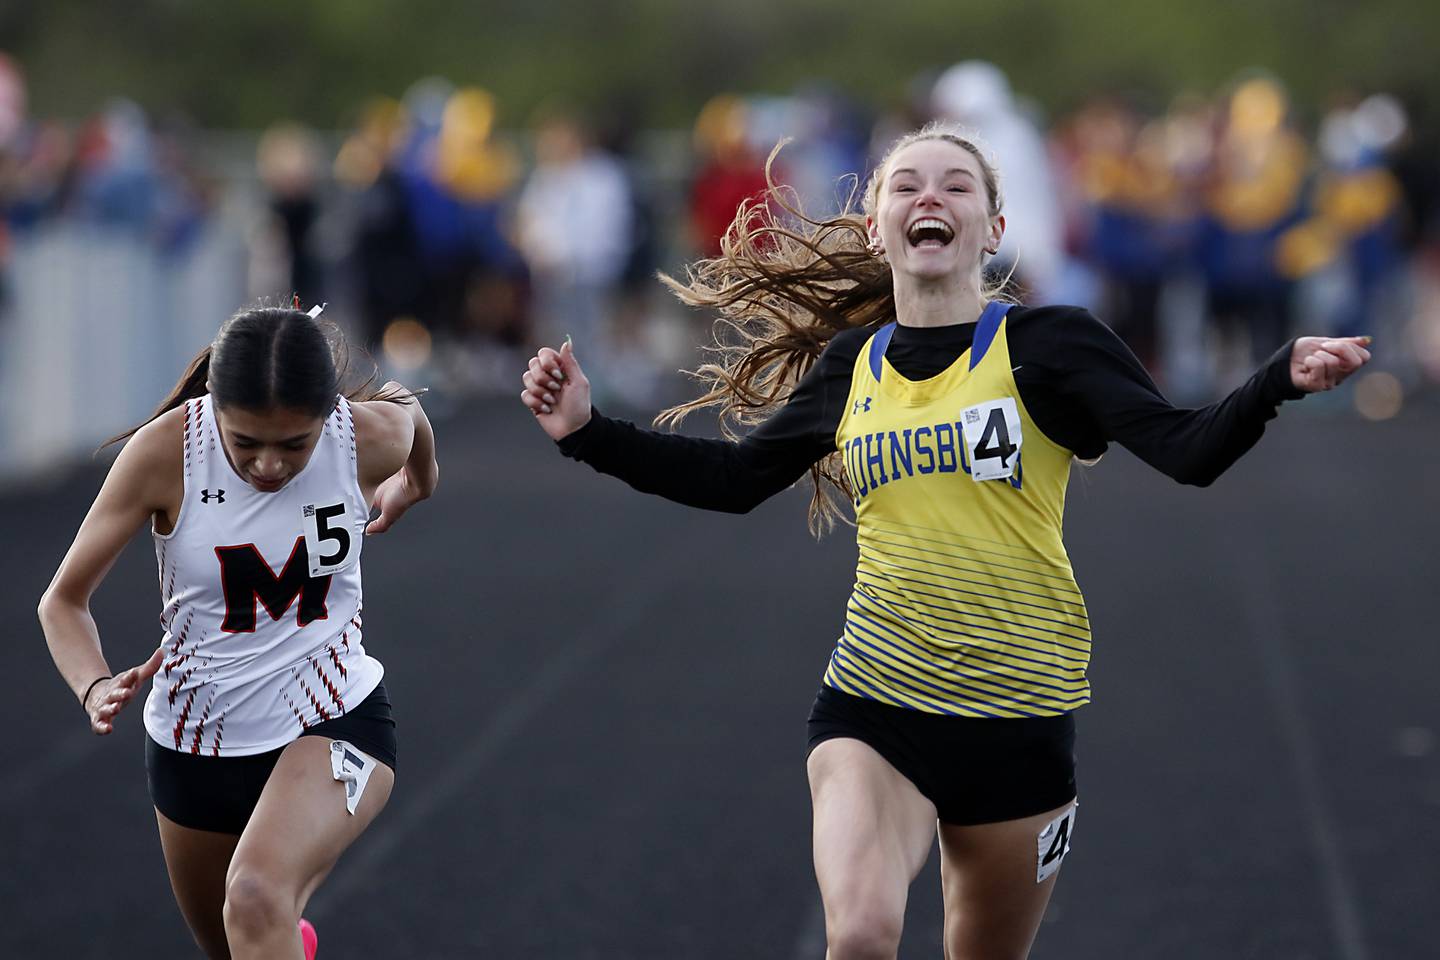 Johnsburg’s Caitlyn Casella wins the 100 meter dash Friday, April 21, 2023, during the McHenry County Track and Field Meet at Cary-Grove High School.